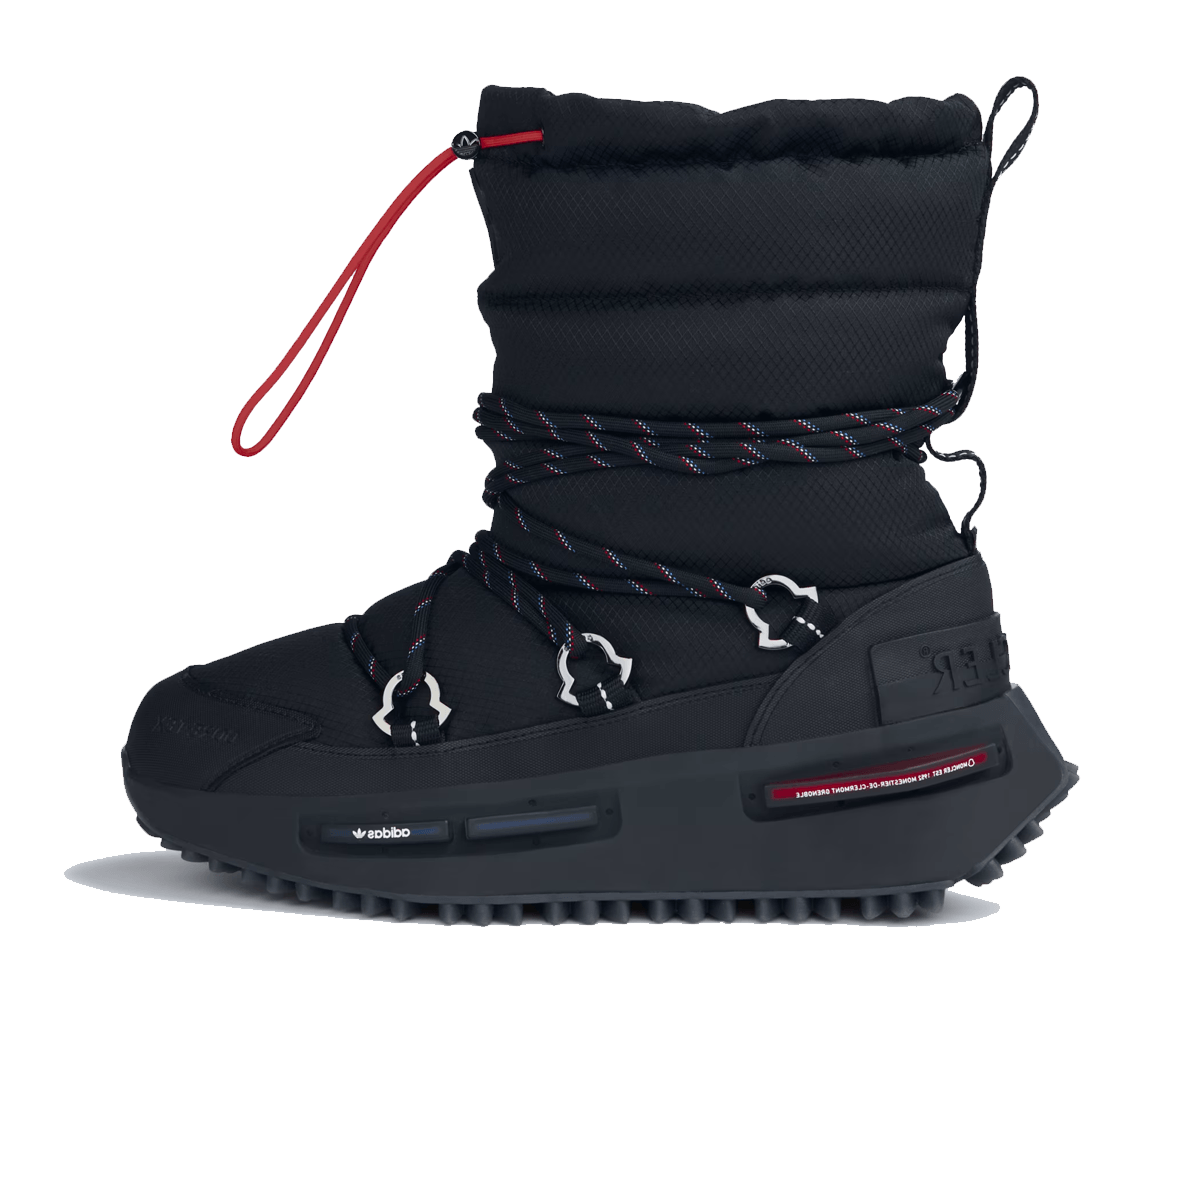 Moncler x adidas NMD Mid 'Core Black' IG7869